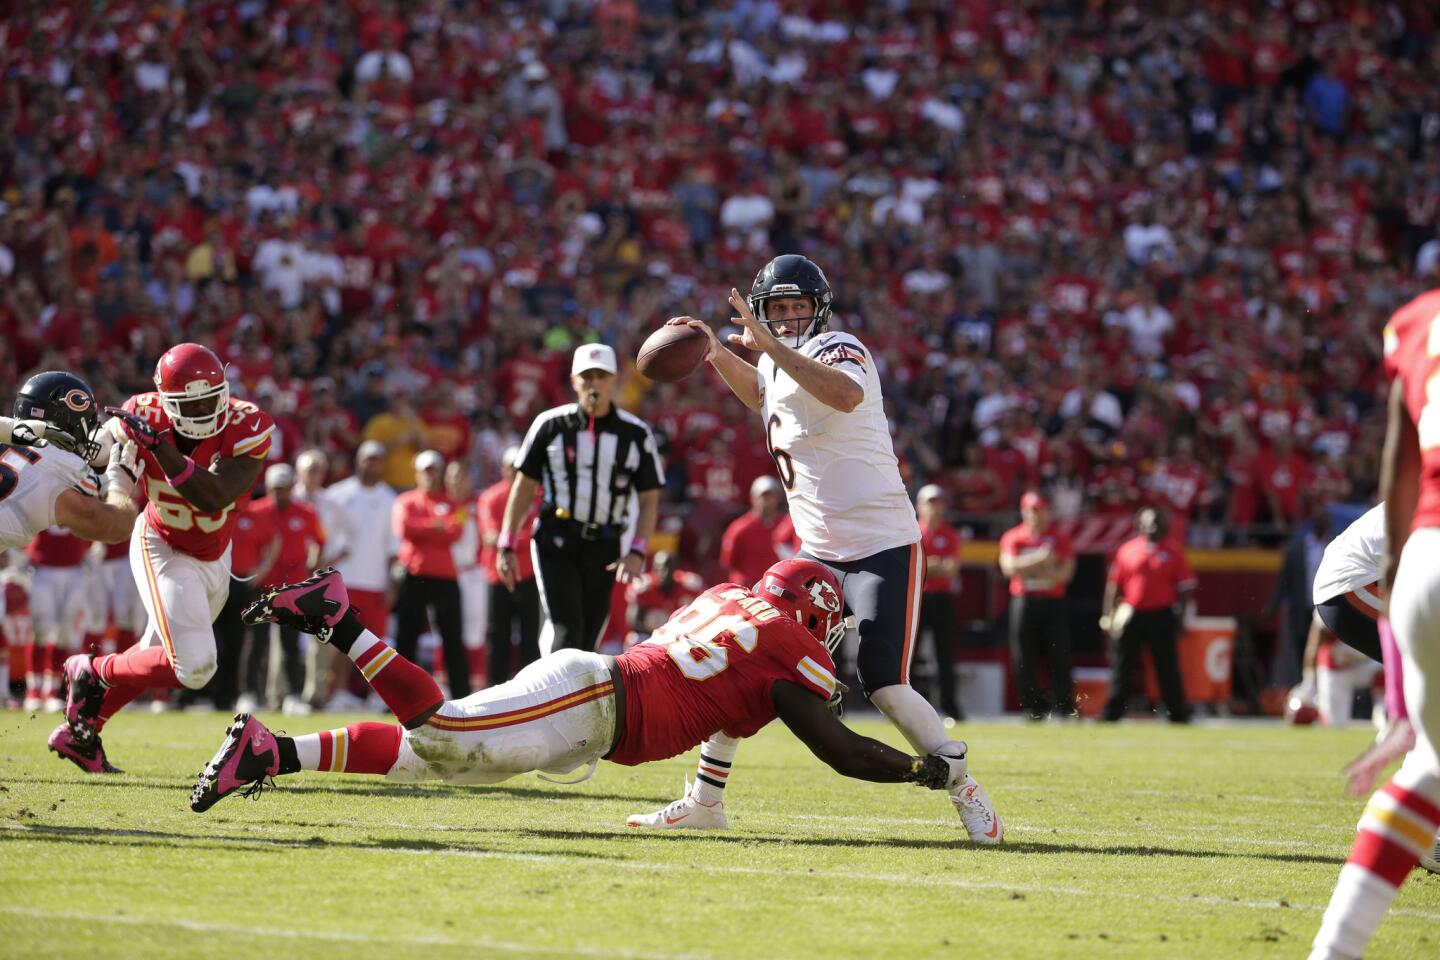 Jay Cutler throws the game-winning touchdown pass to running back Matt Forte while under pressure from Chiefs defensive lineman Jaye Howard late in the fourth quarter.